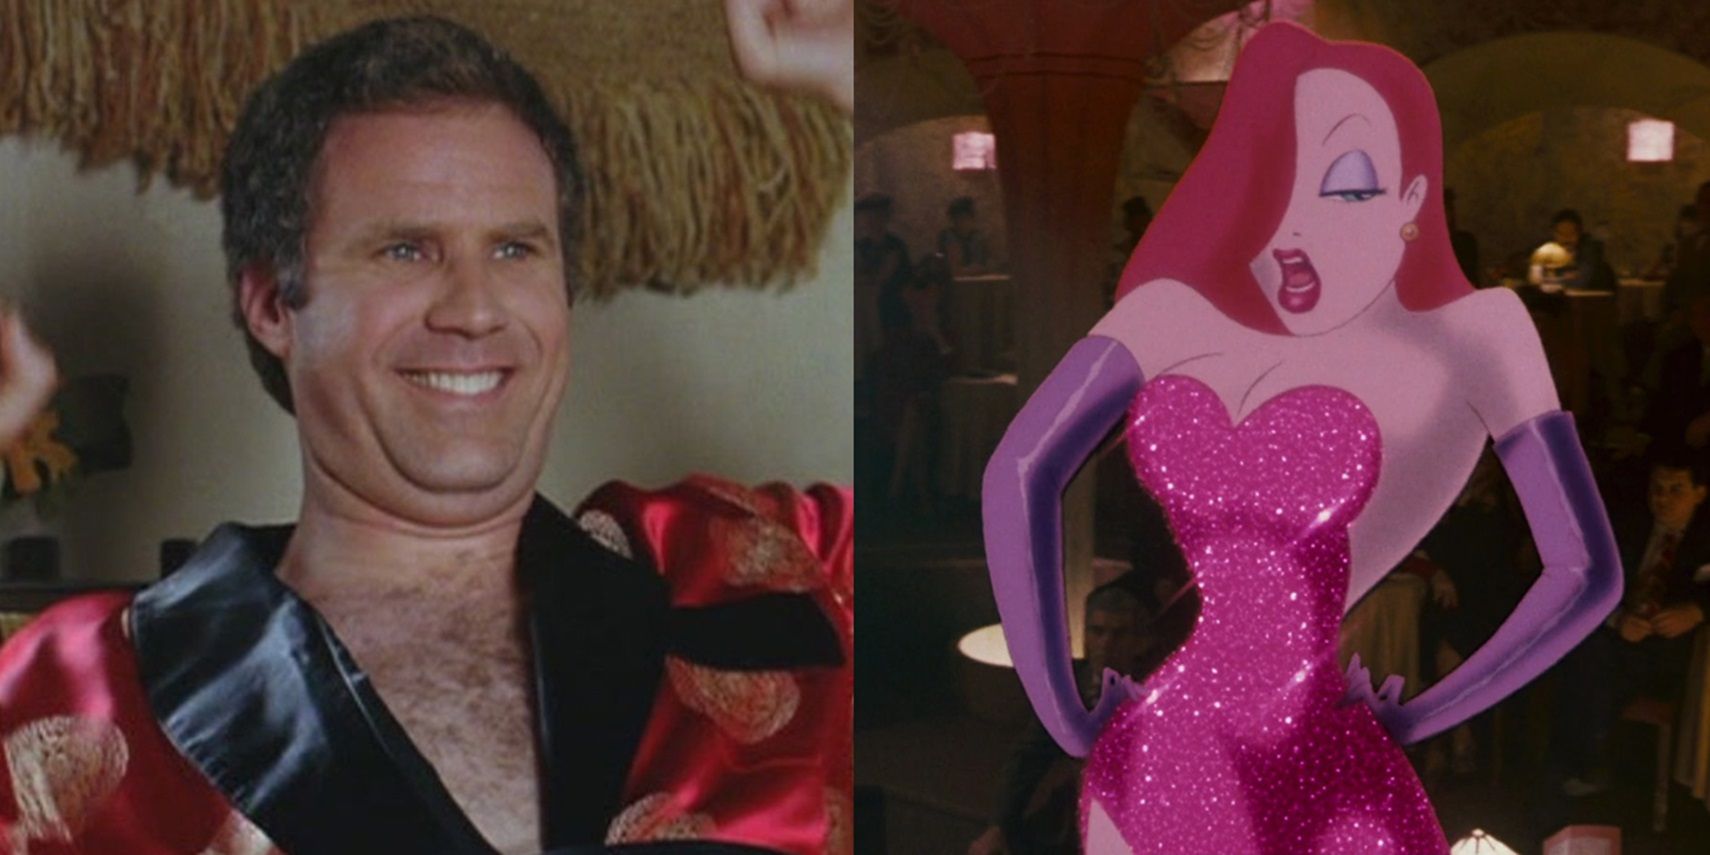 Split image of Chazz Reinhold in Wedding Crashers and Jessica Rabbit in Who Framed Roger Rabbit